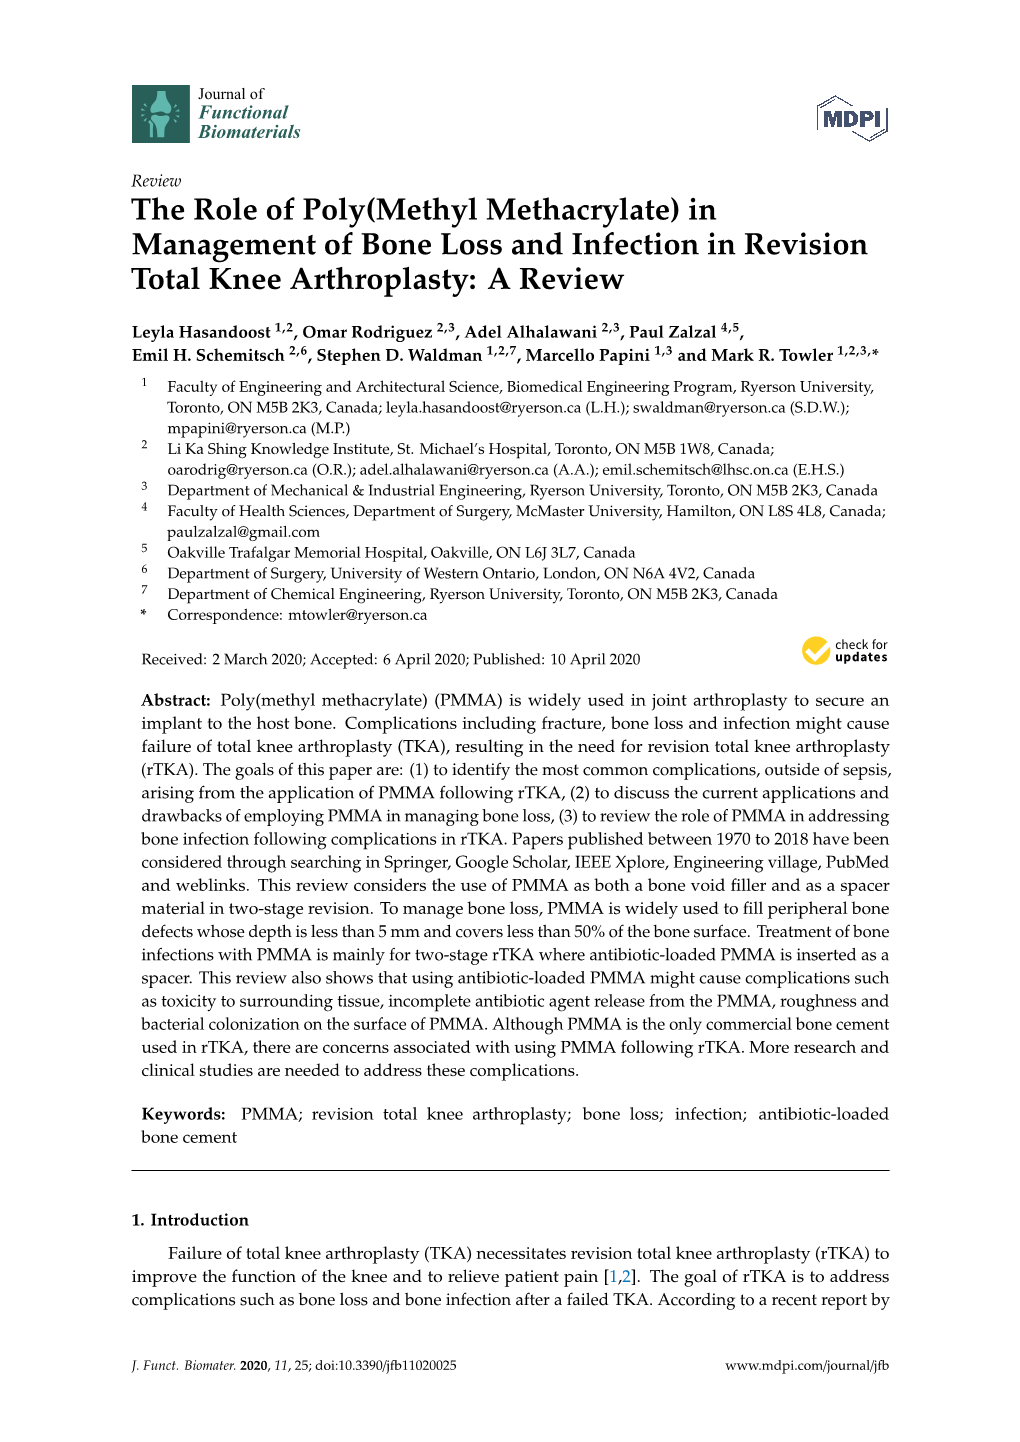 The Role of Poly(Methyl Methacrylate) in Management of Bone Loss and Infection in Revision Total Knee Arthroplasty: a Review